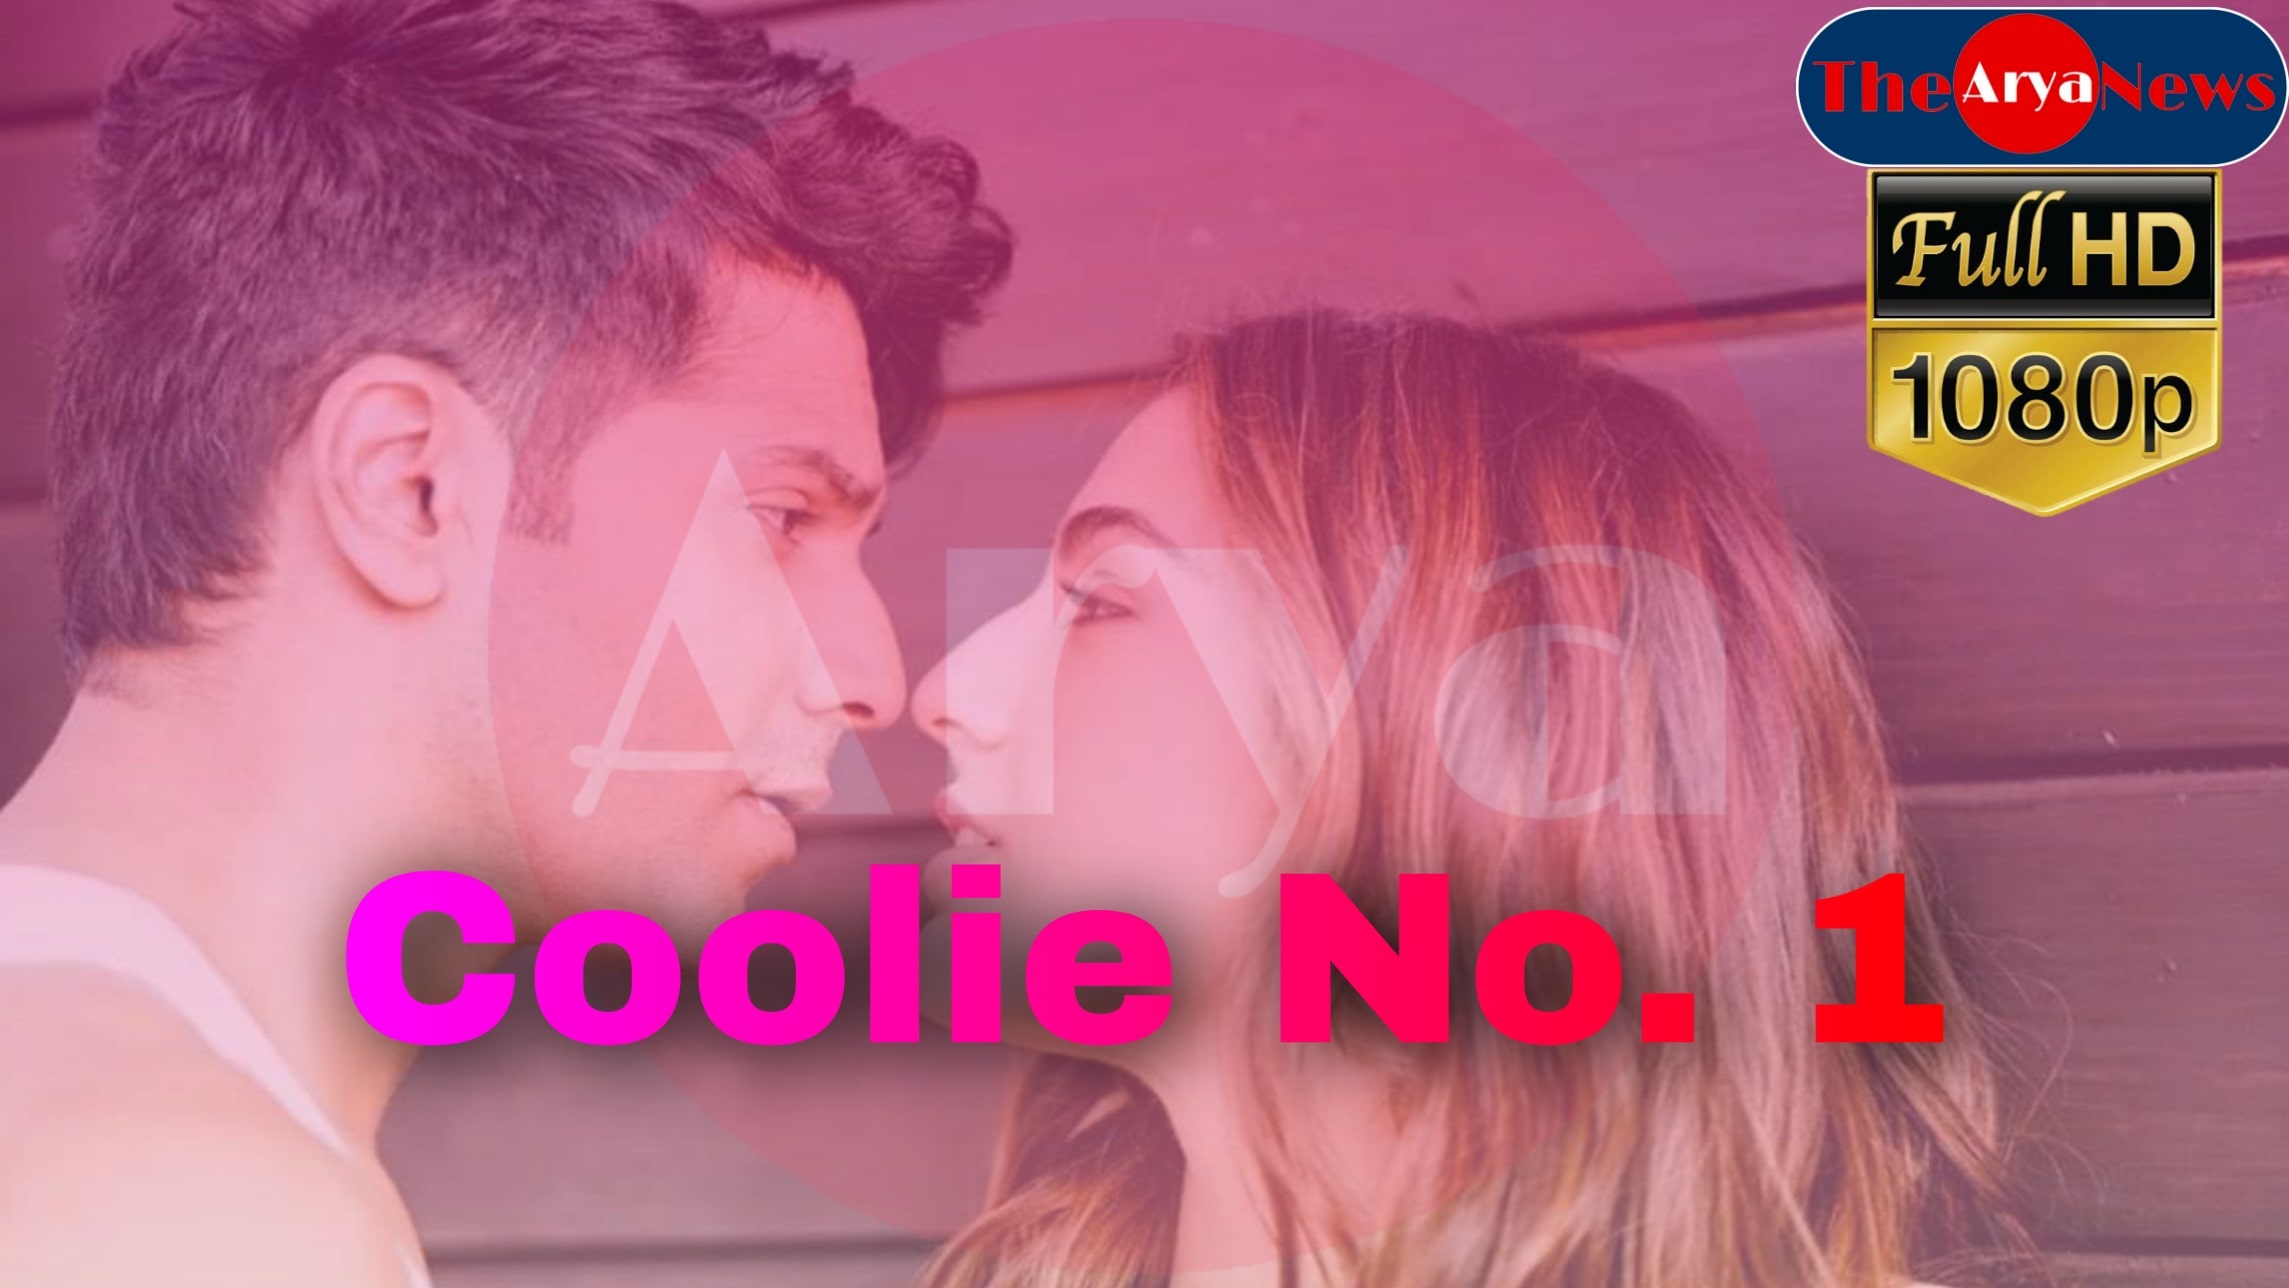 Coolie No. 1 Download Full Leaked Movie on TamilRockers